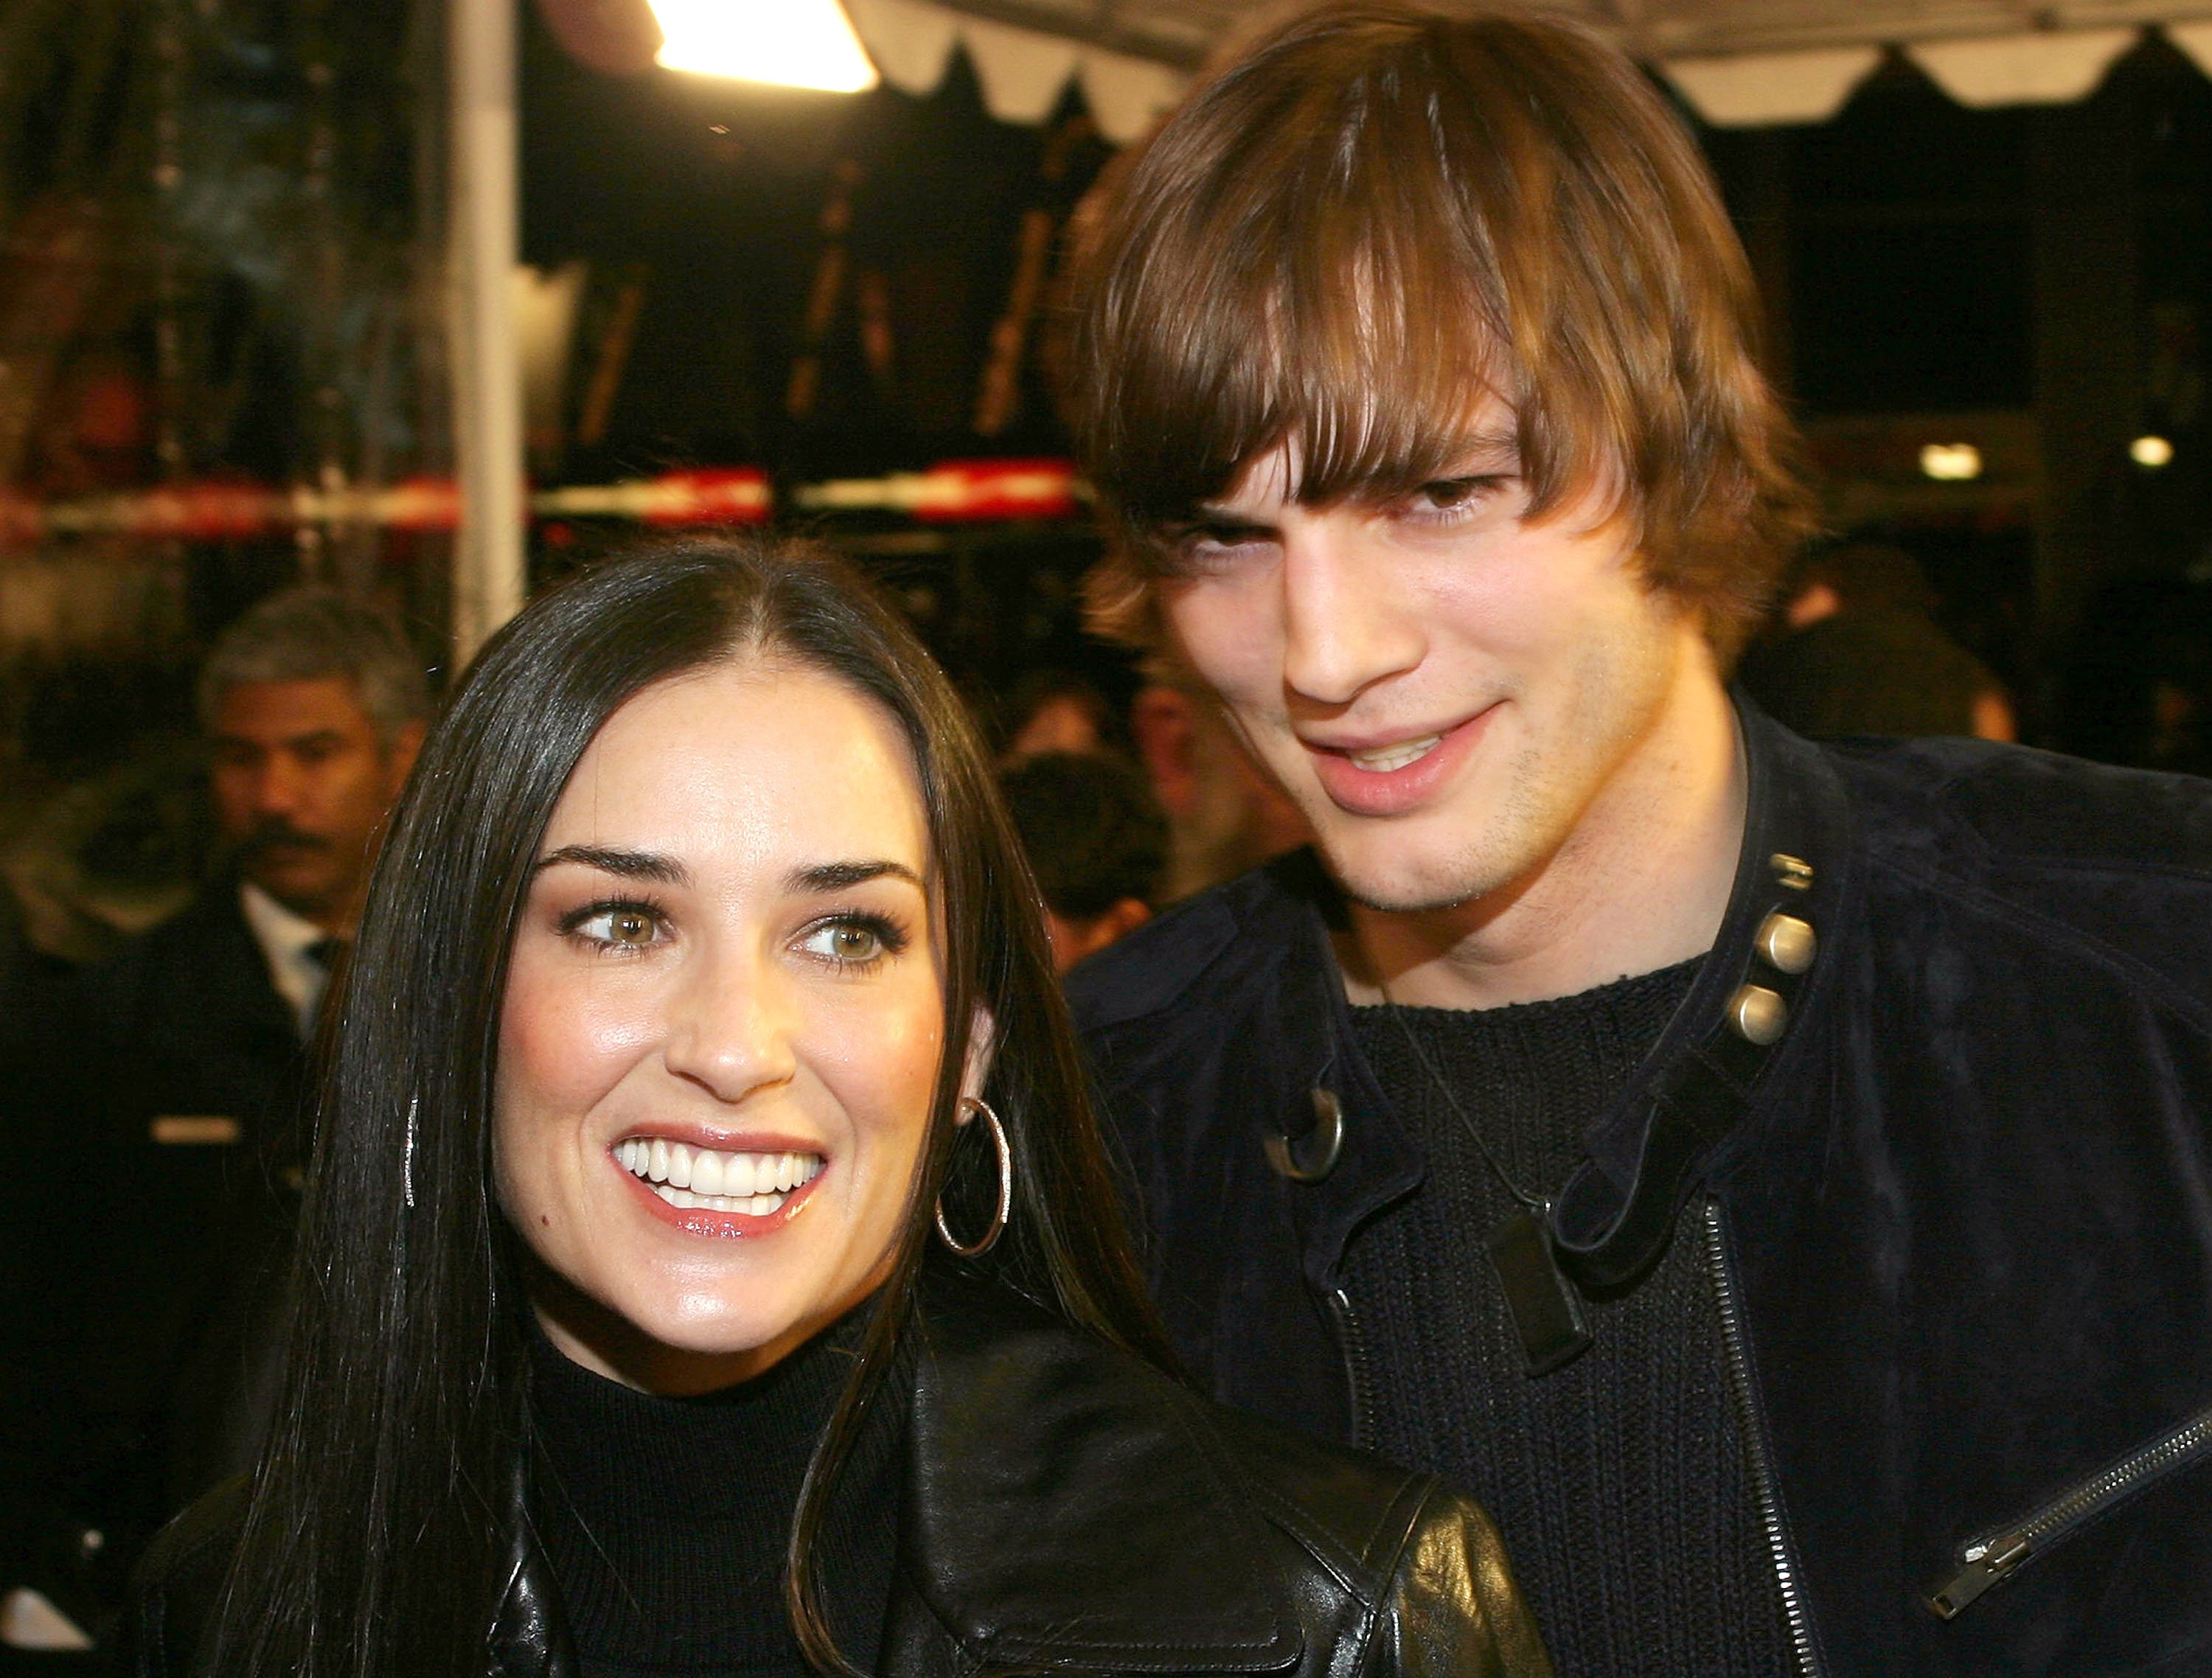 Ashton Kutcher and Demi Moore at the Cheaper By The Dozen Premiere December 14, 2003 | Photo: GettyImages